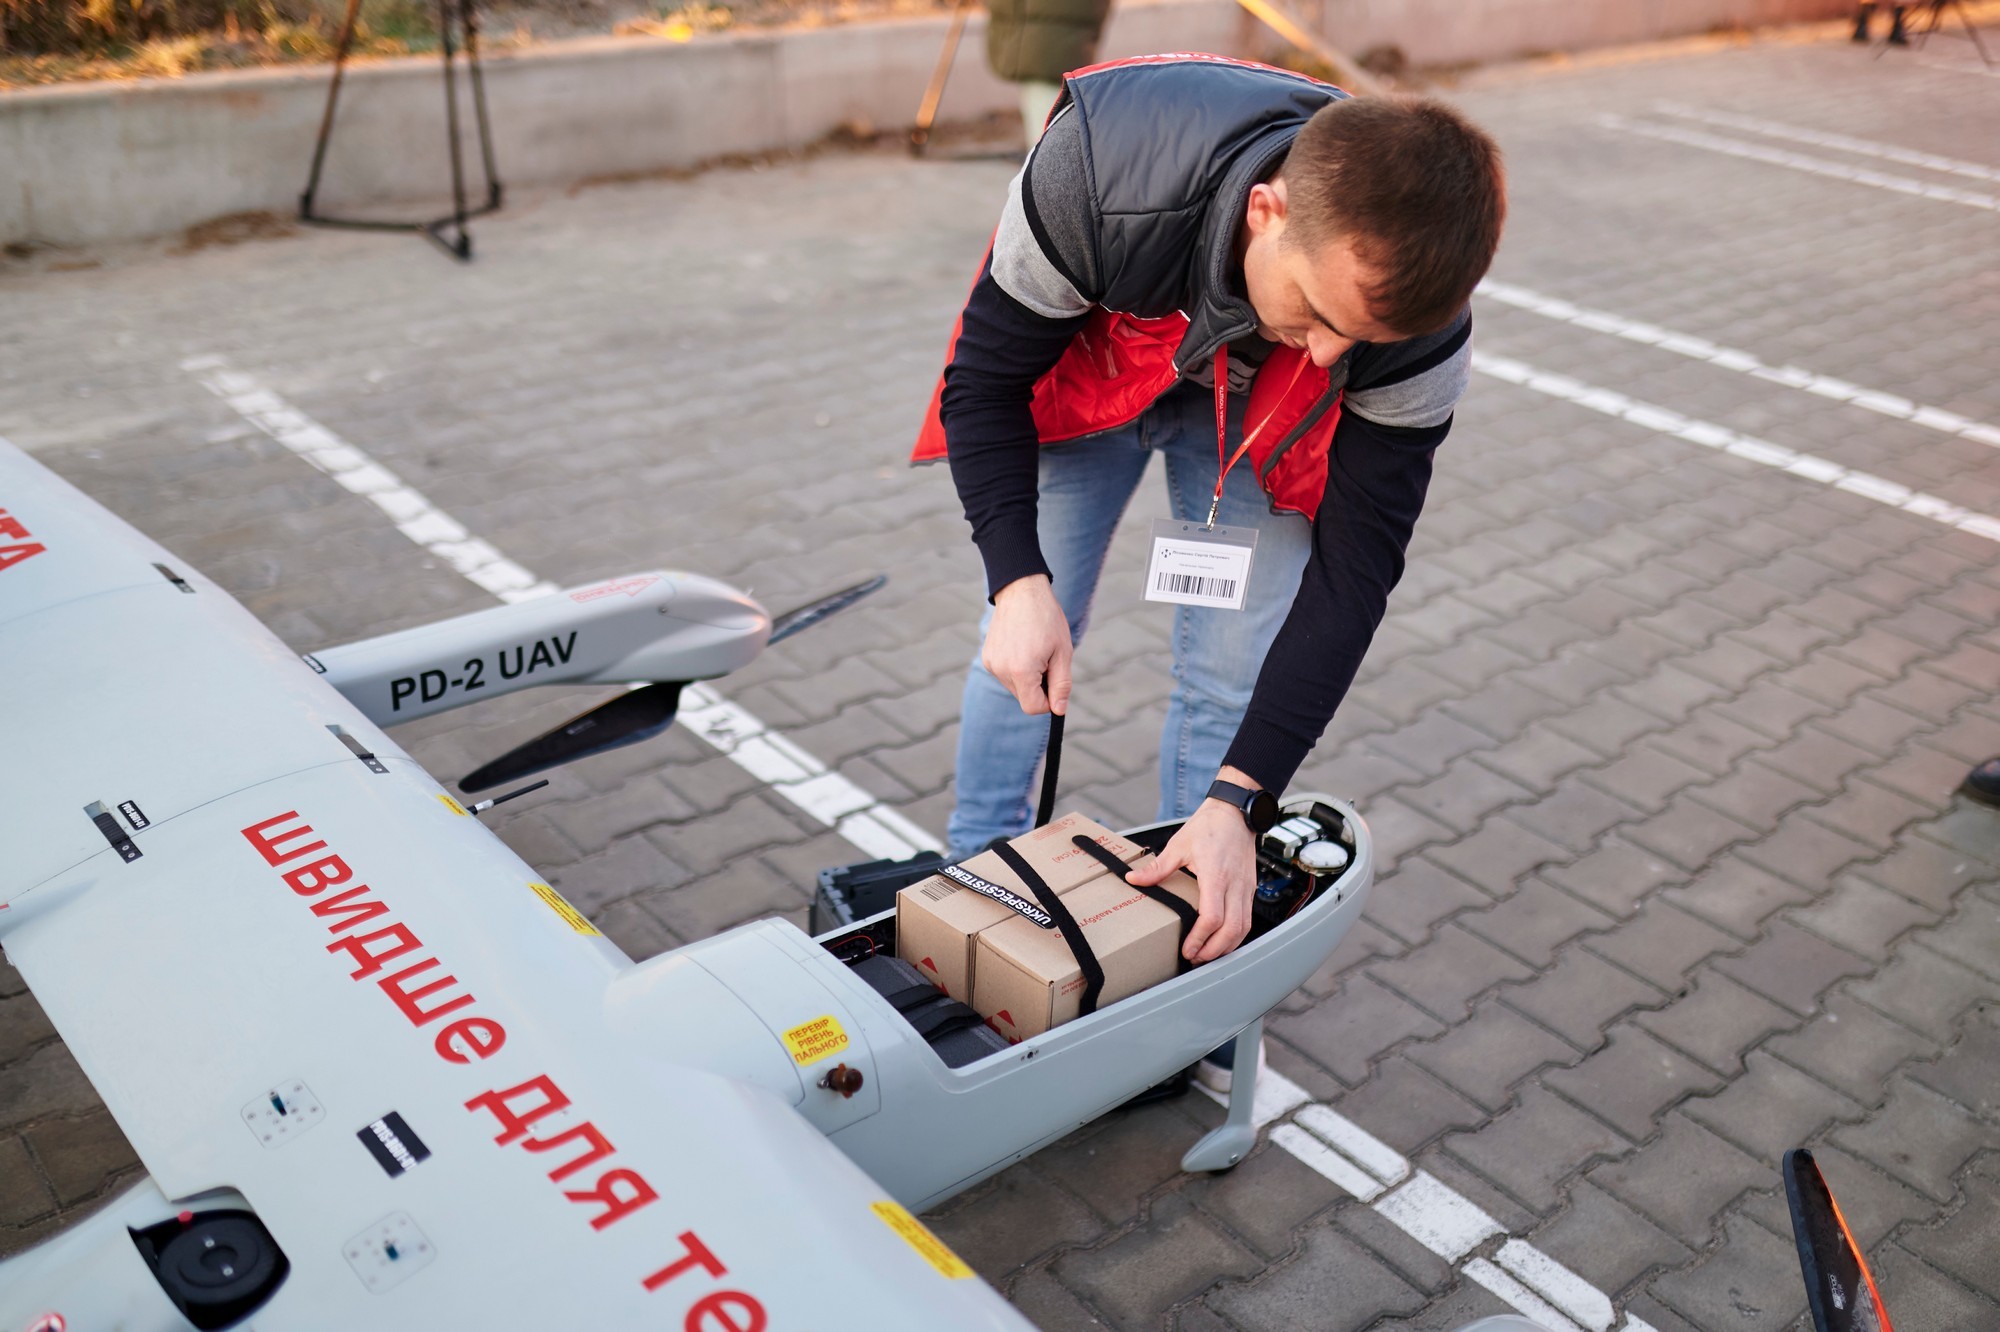 "New post" carried out the second unmanned parcel delivery from Kyiv to Lviv (UAV can carry up to 16 kg of cargo and fly at an altitude of up to 900 m for 12 hours)